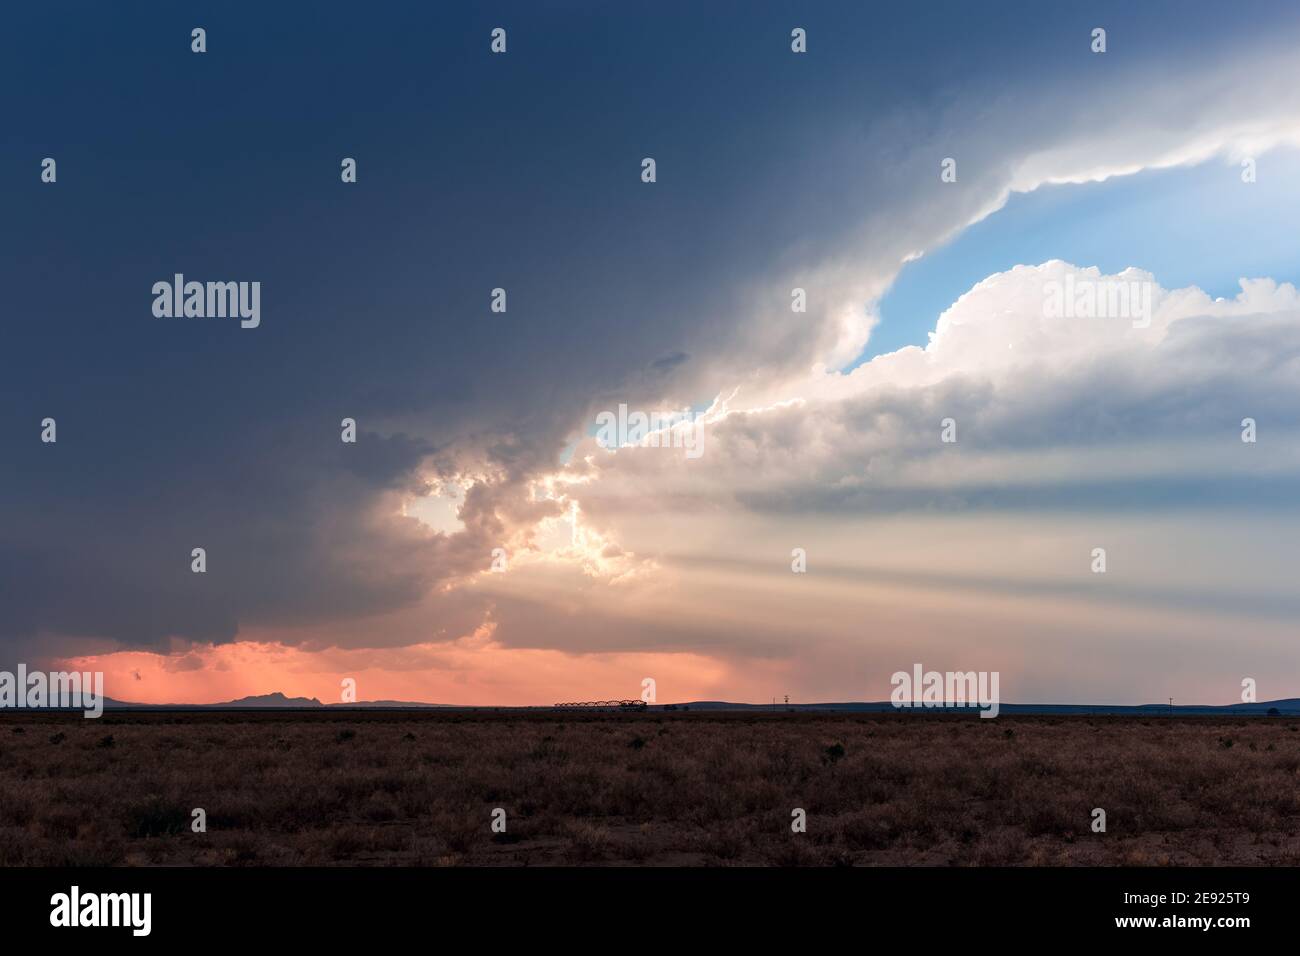 Crepuscular rays shining through dark storm clouds at sunset in the desert near Dell City, Texas Stock Photo